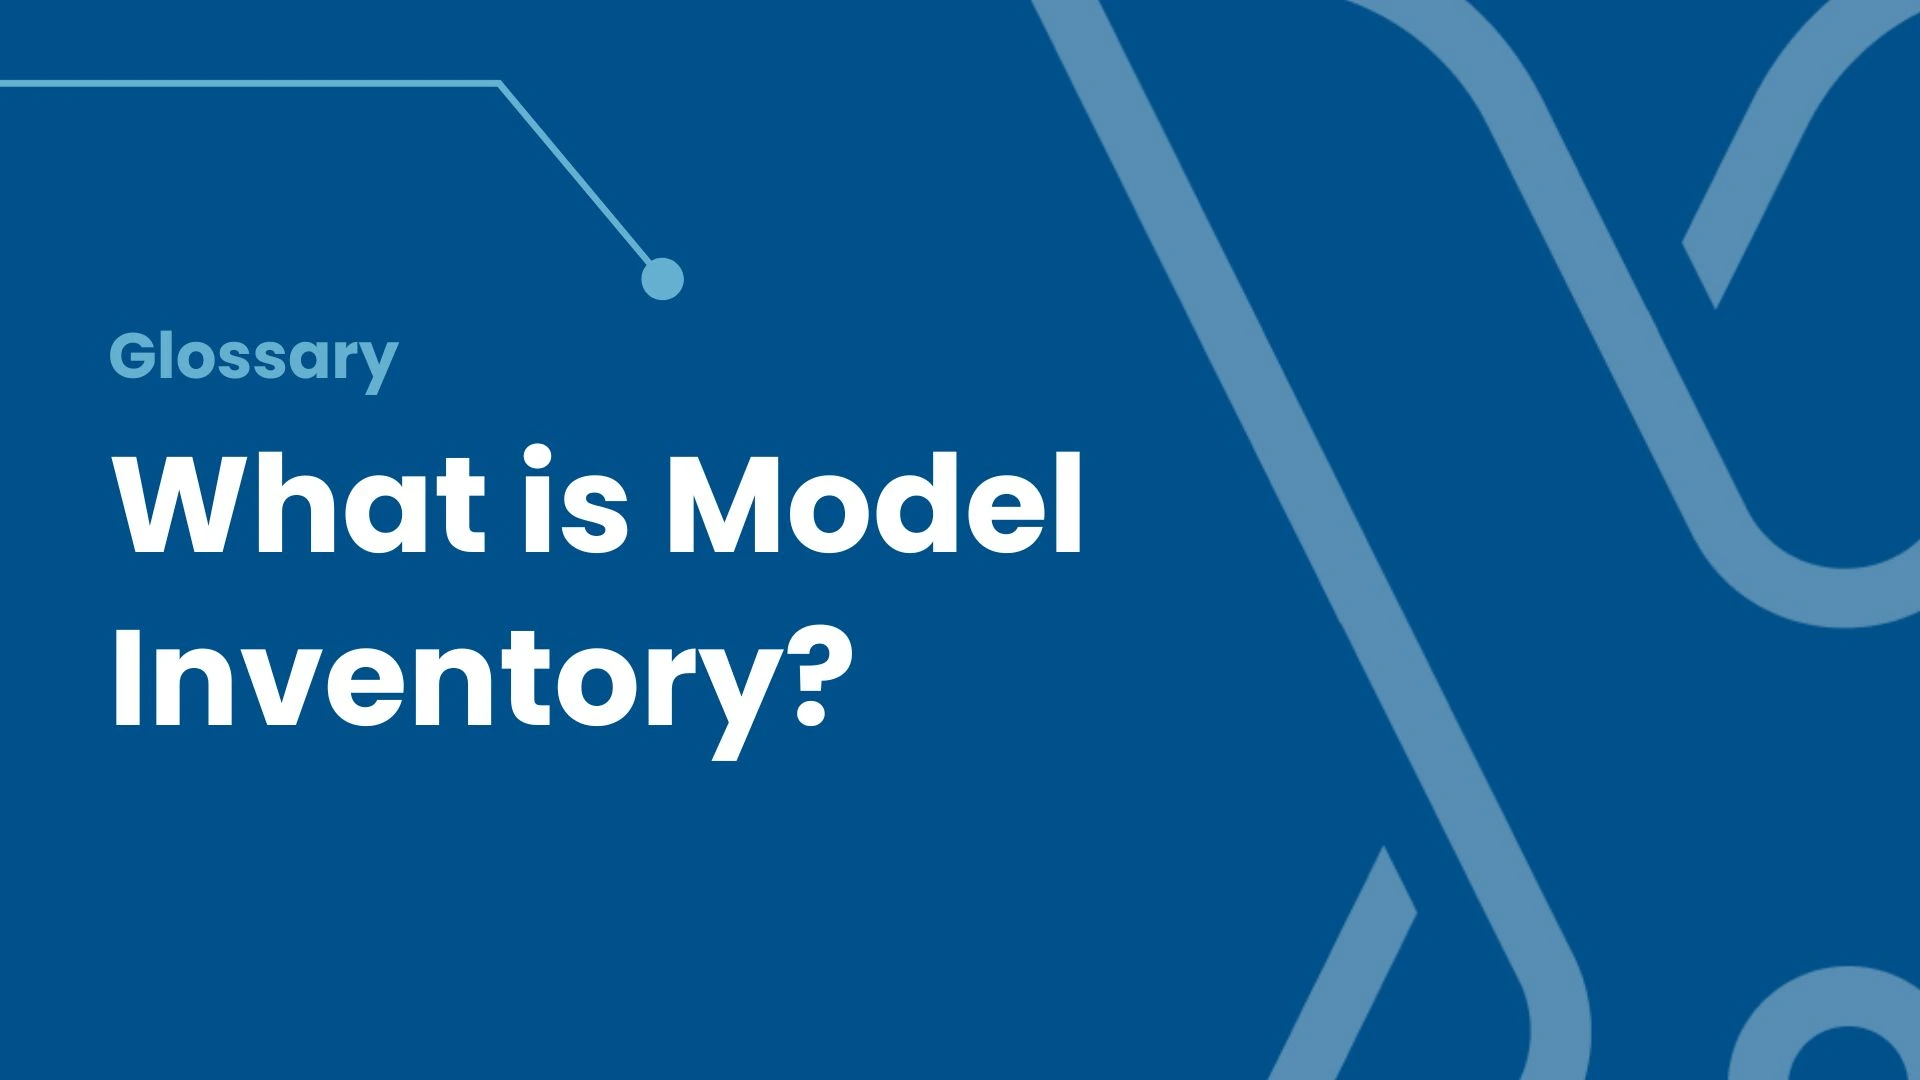 What is Model Inventory?